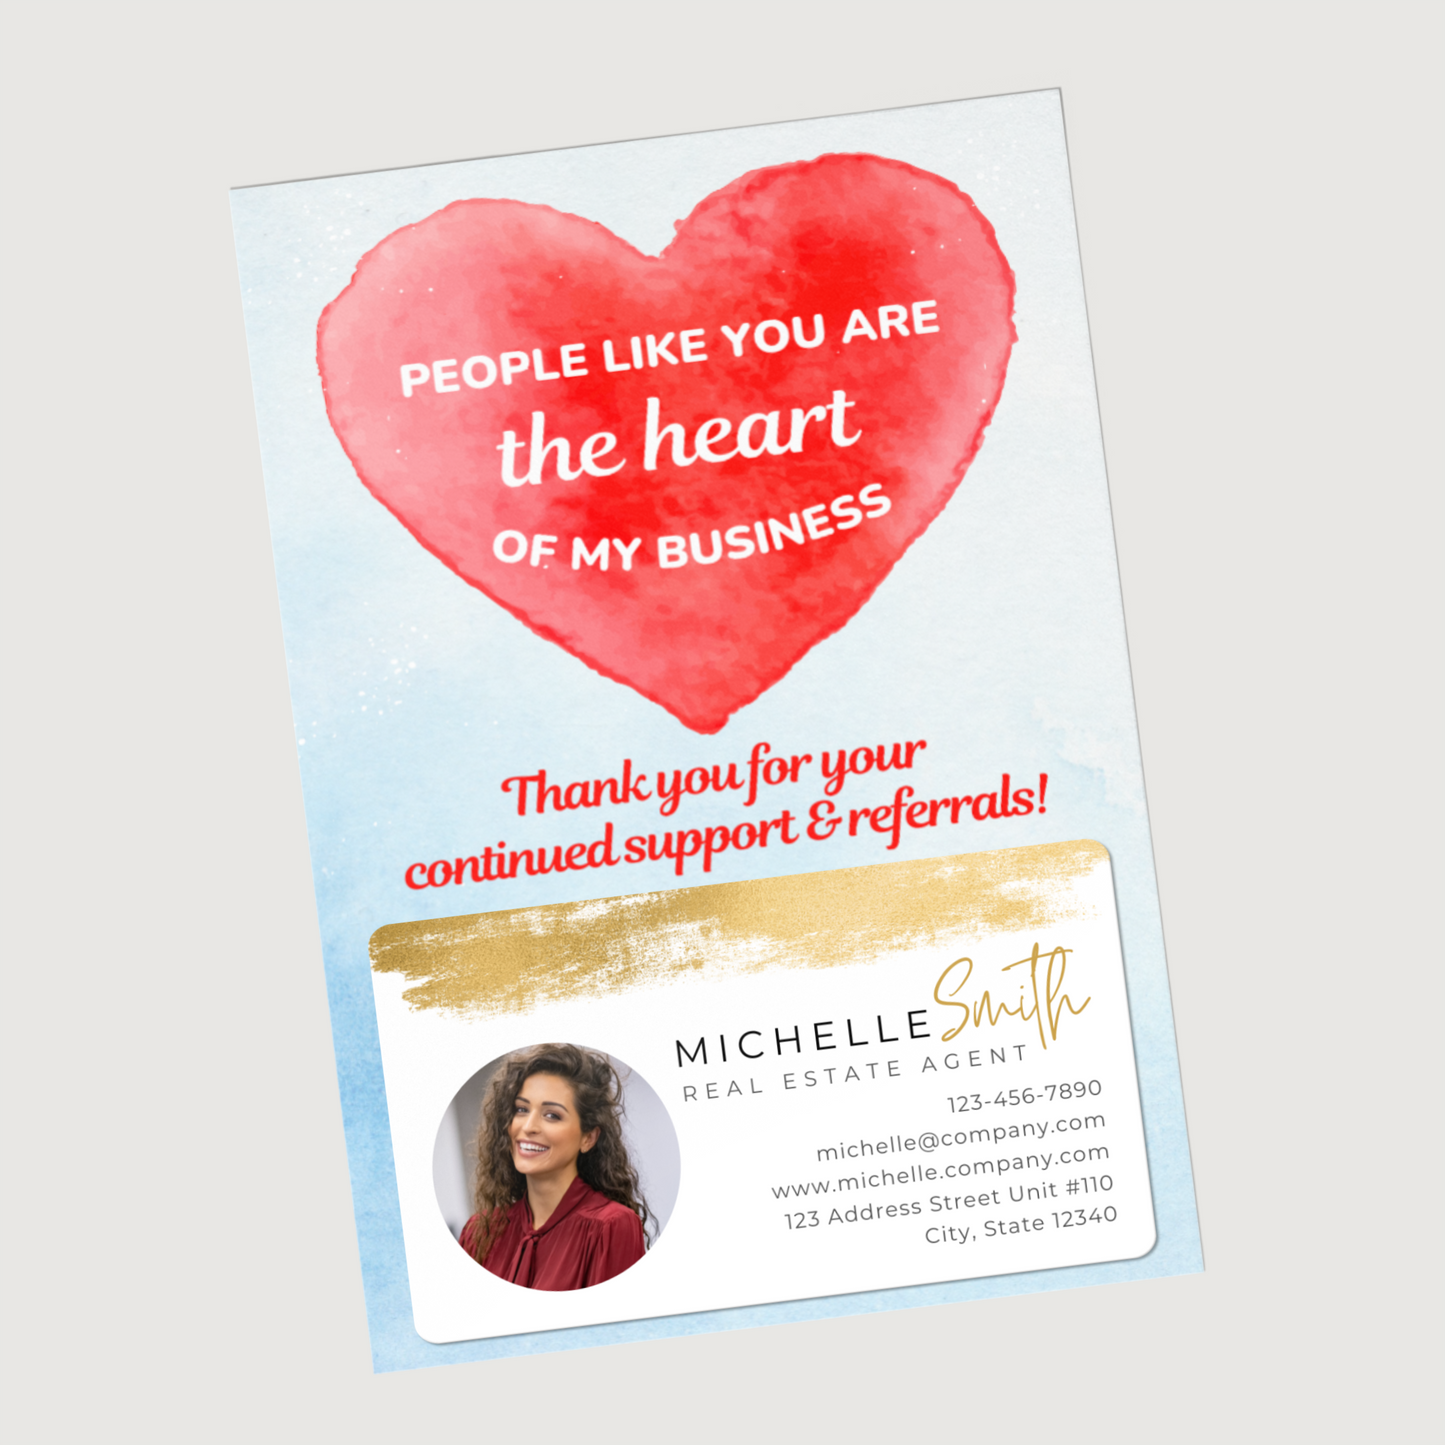 People Like You Are The Heart of My Business - Set of Valentines Postcard Mailers